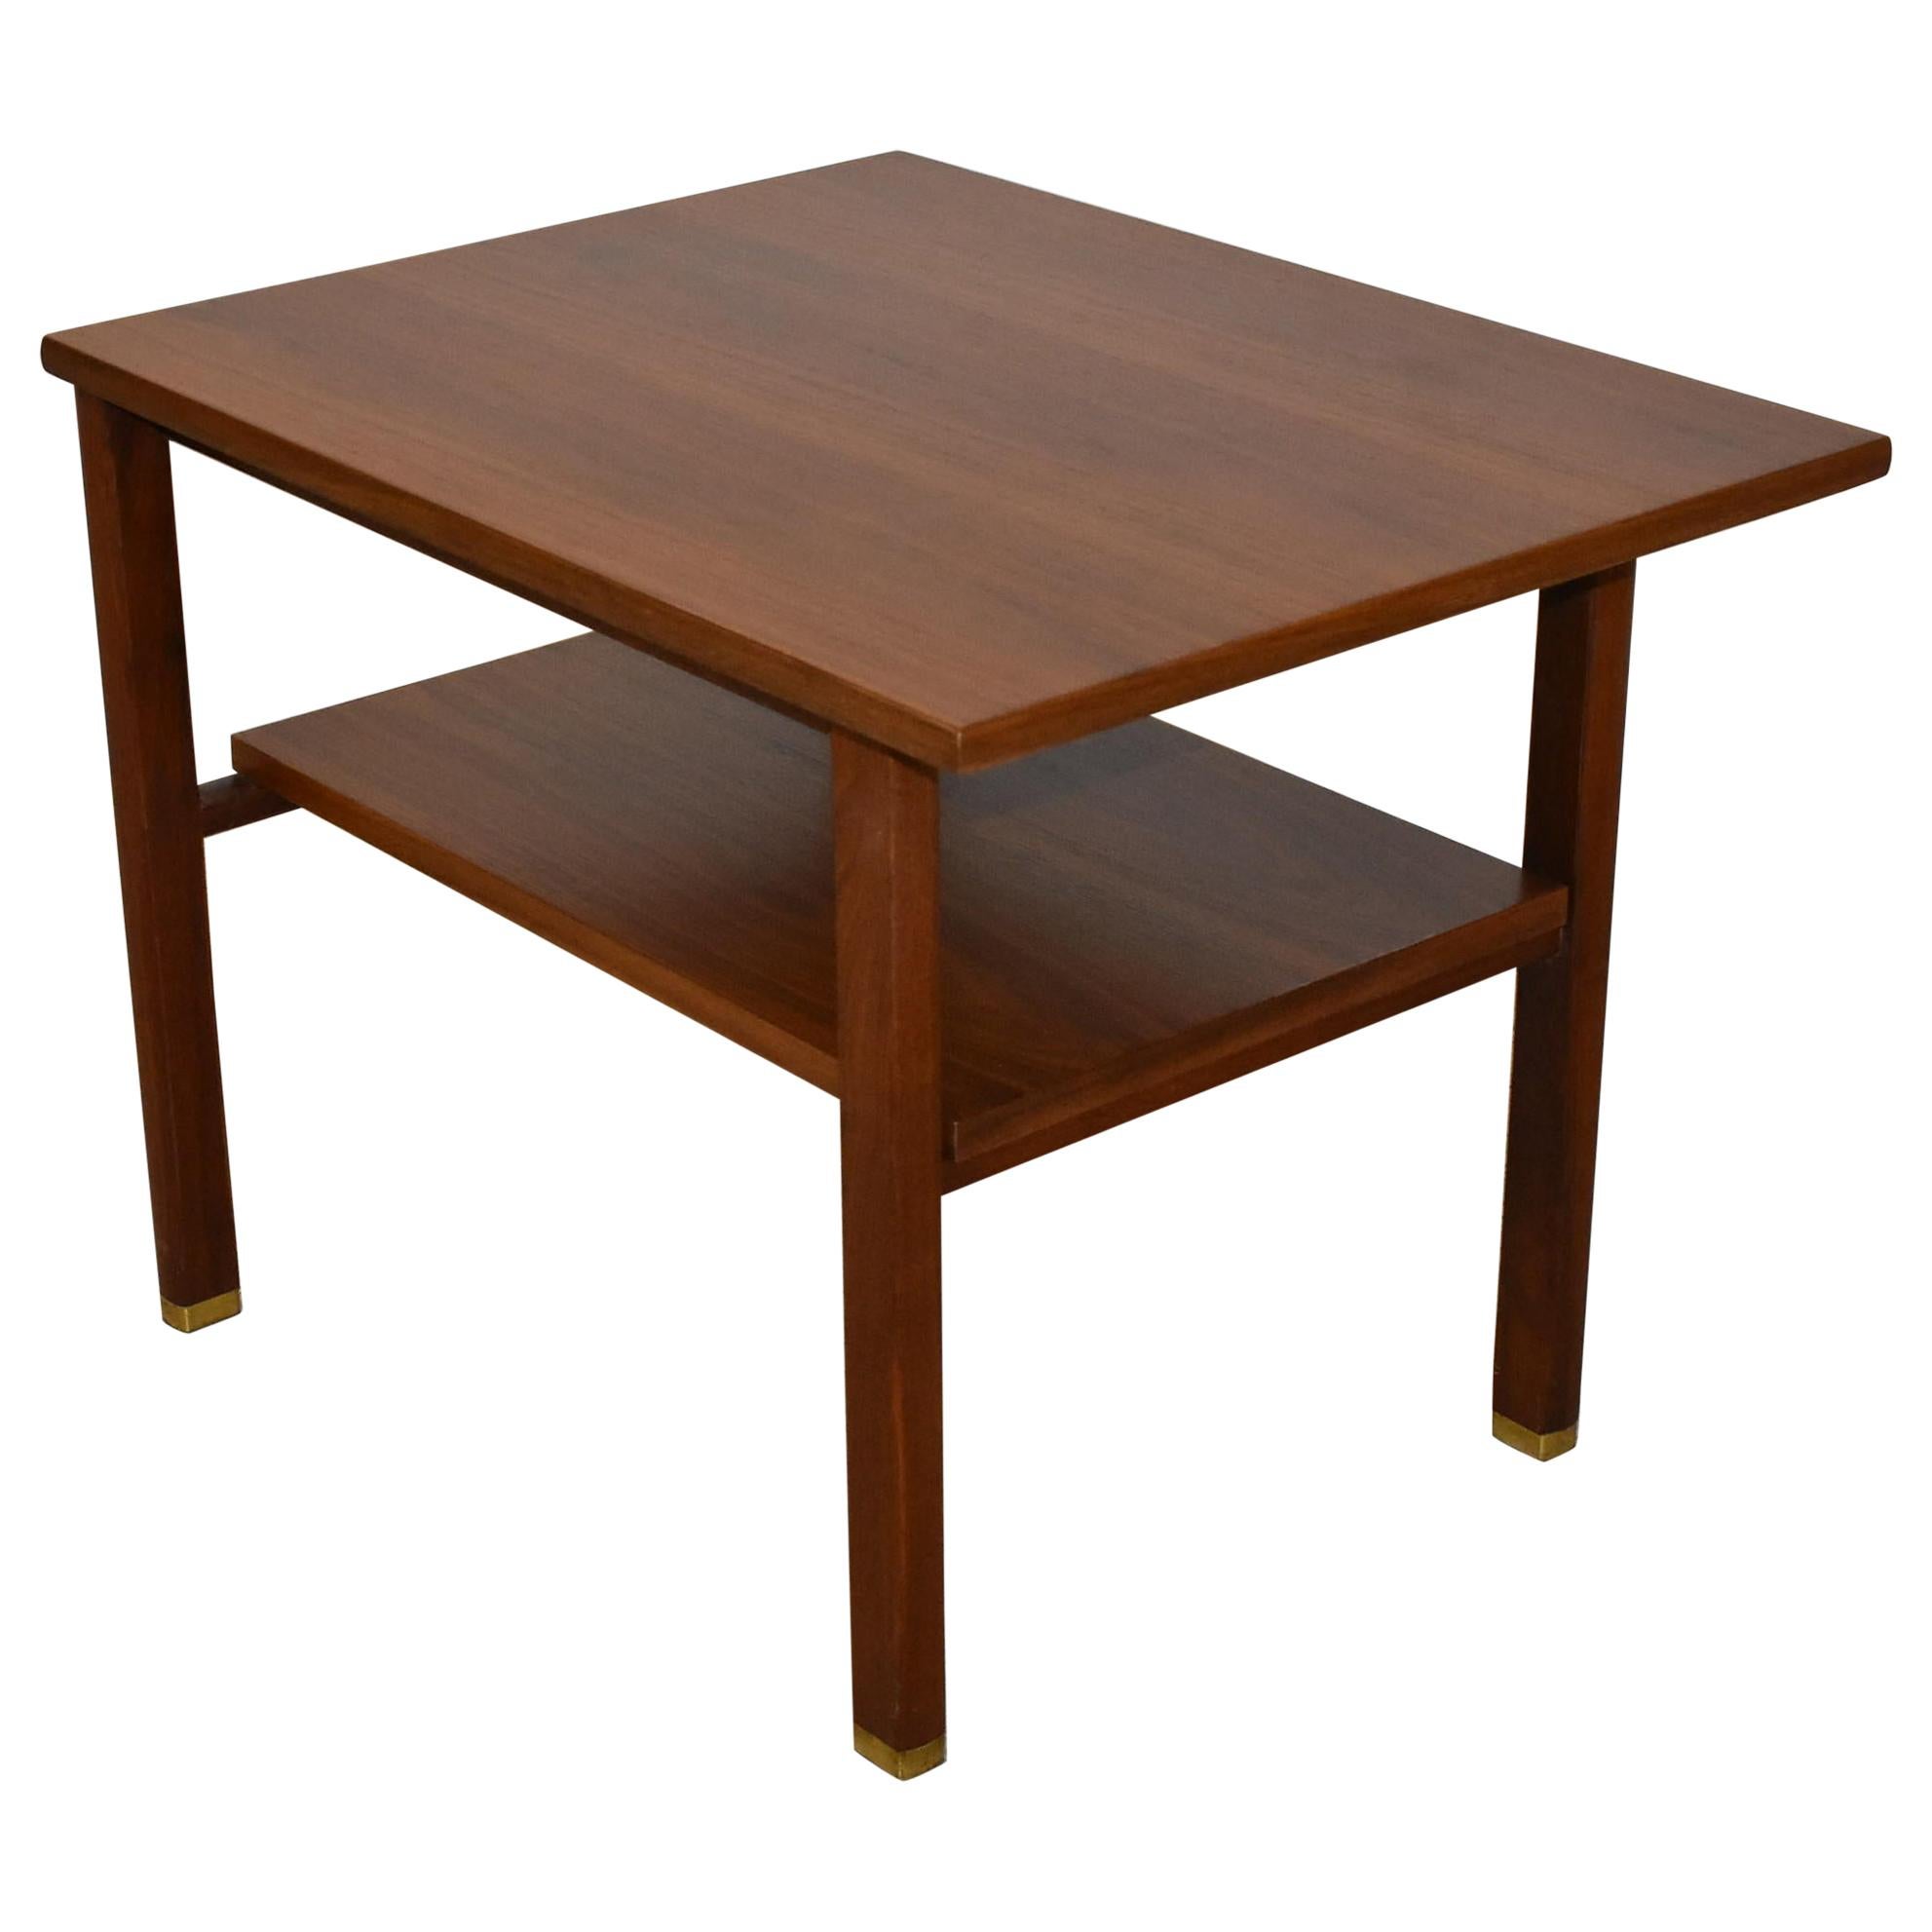 Two-Tiered Walnut Cantilever Top Table Designed by Edward Wormley for Dunbar